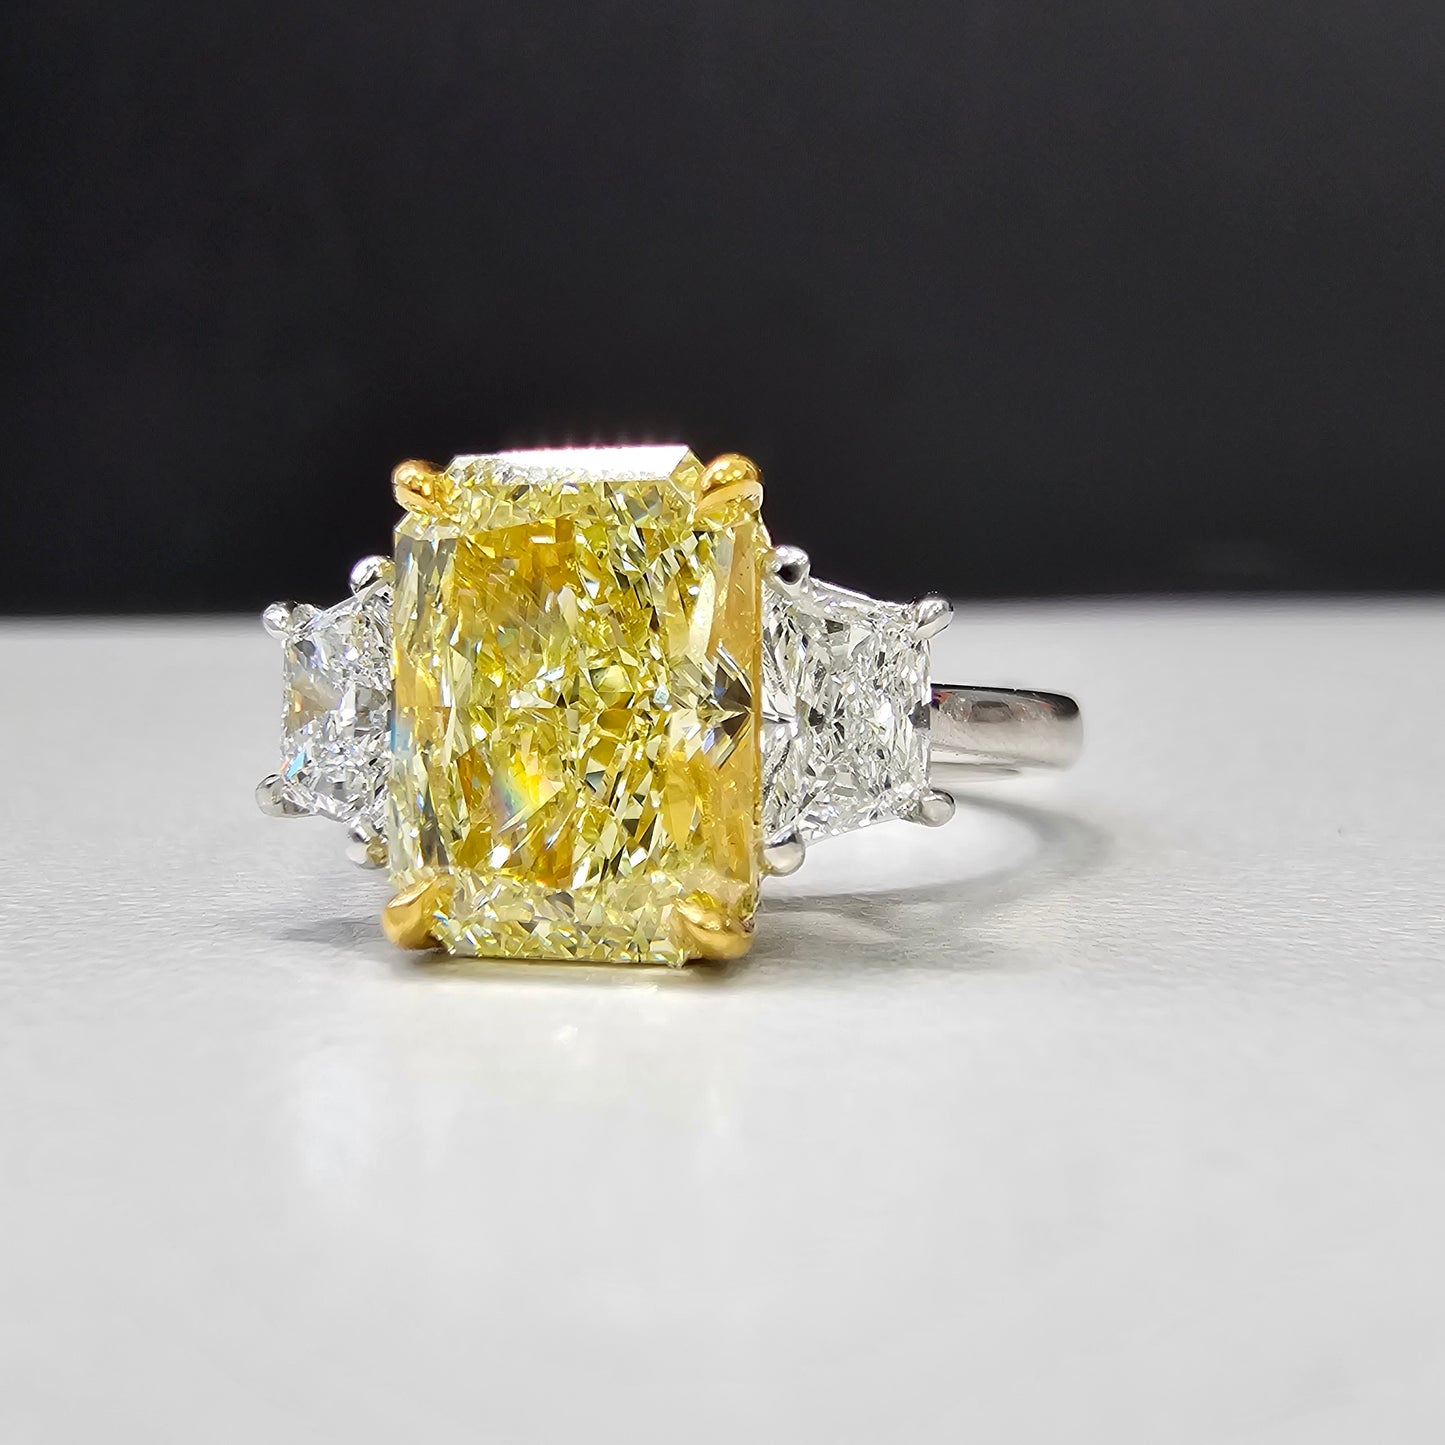 3ct Fancy Yellow Elongated Radiant Three Stone Diamond Ring, unique engagement ring with yellow radiant cut diamond